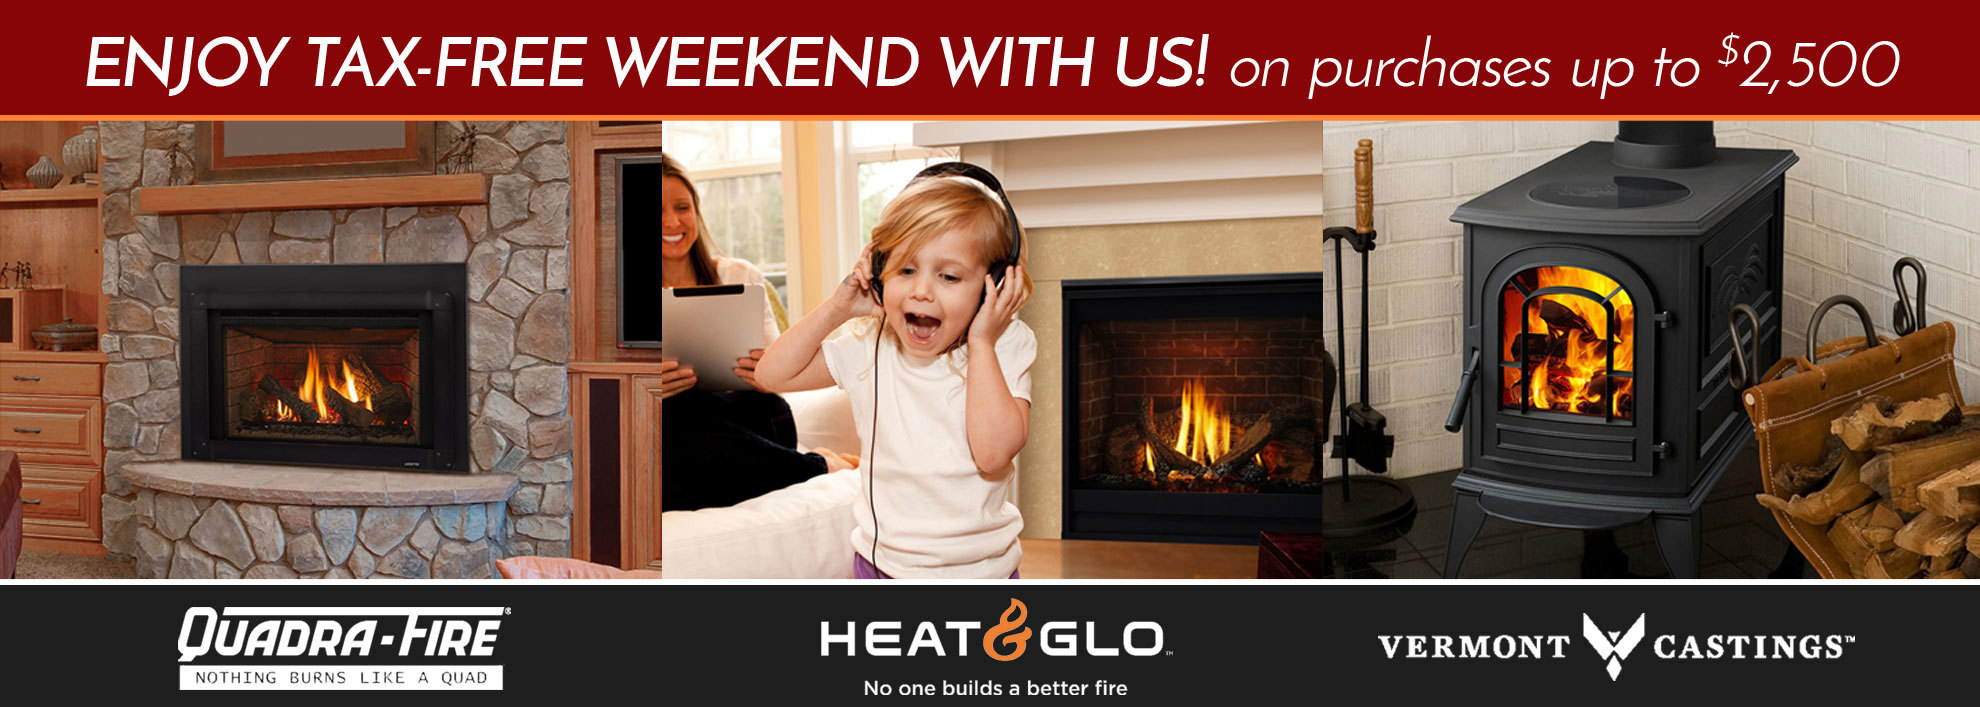 Use The Tax Free Weekend To Upgrade Your Hearth and Save Energy Costs